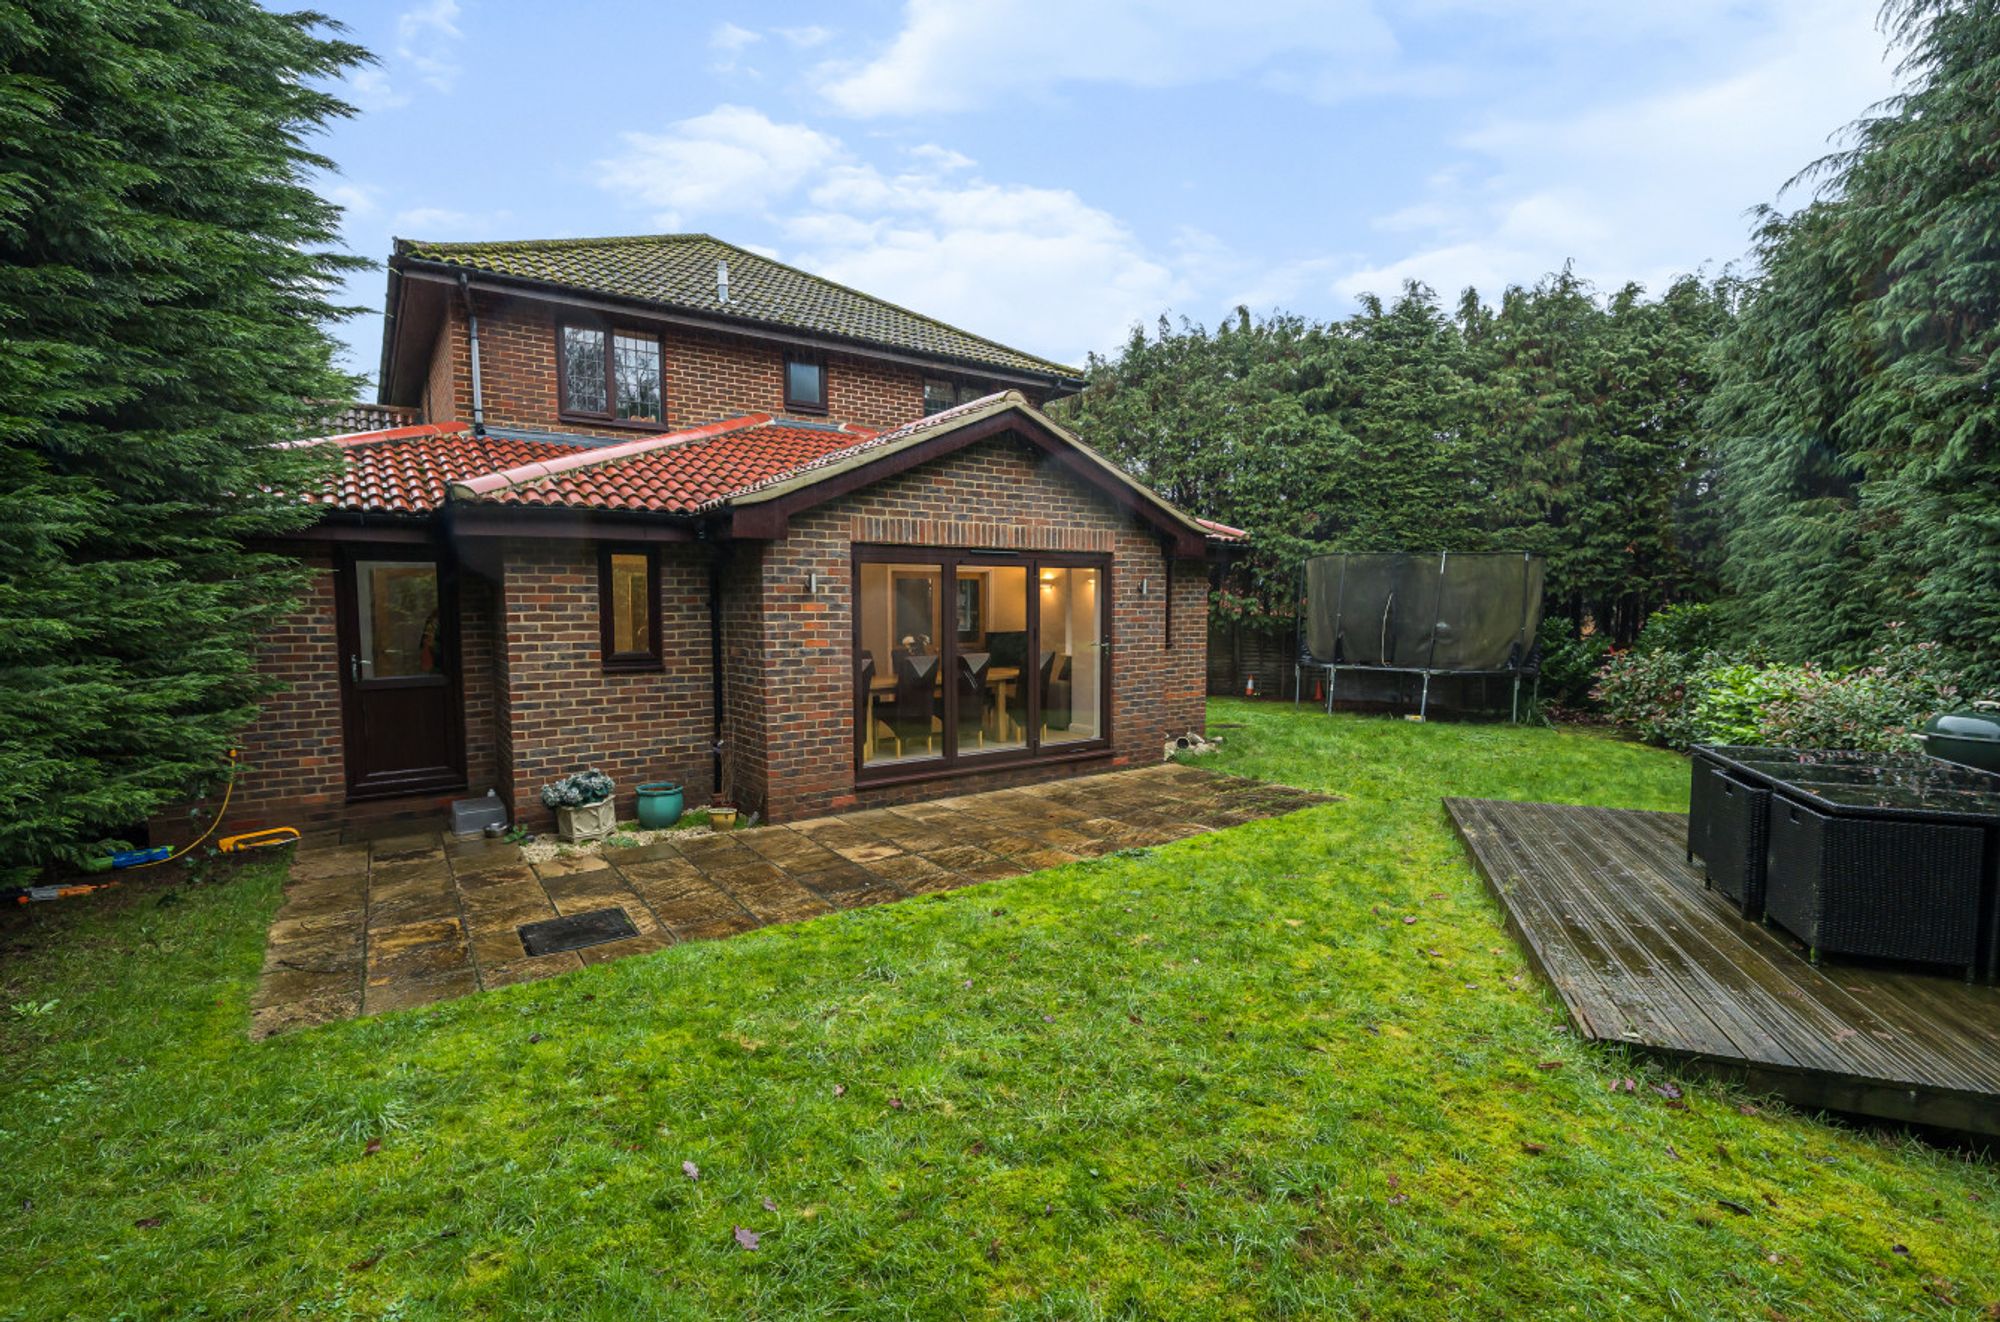 Critchmere Lane, Haslemere, GU27